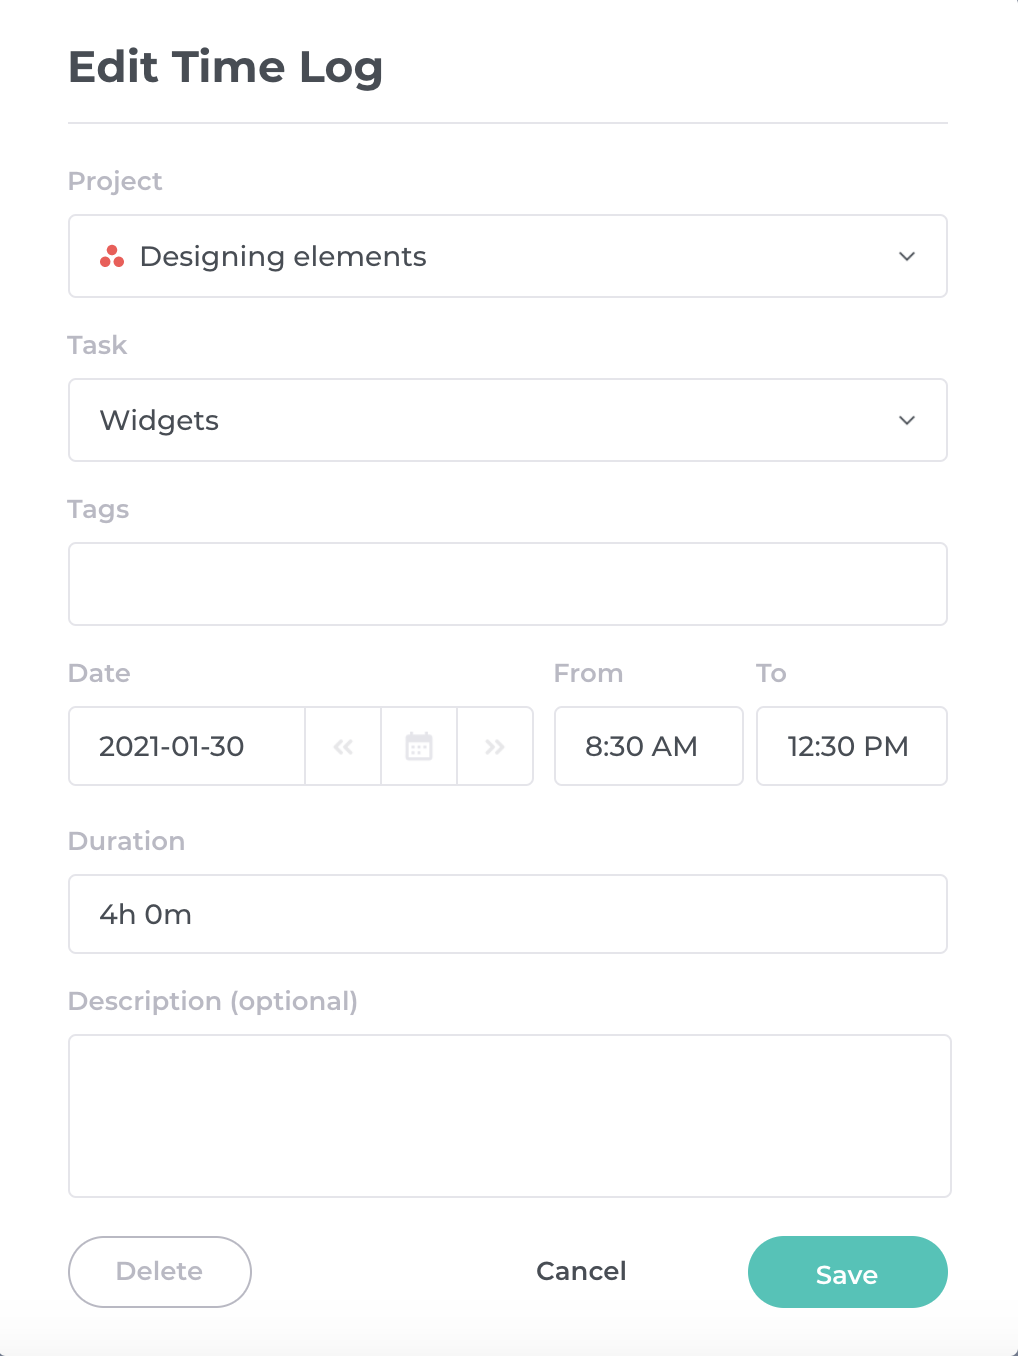 Adding time logs to Asana projects